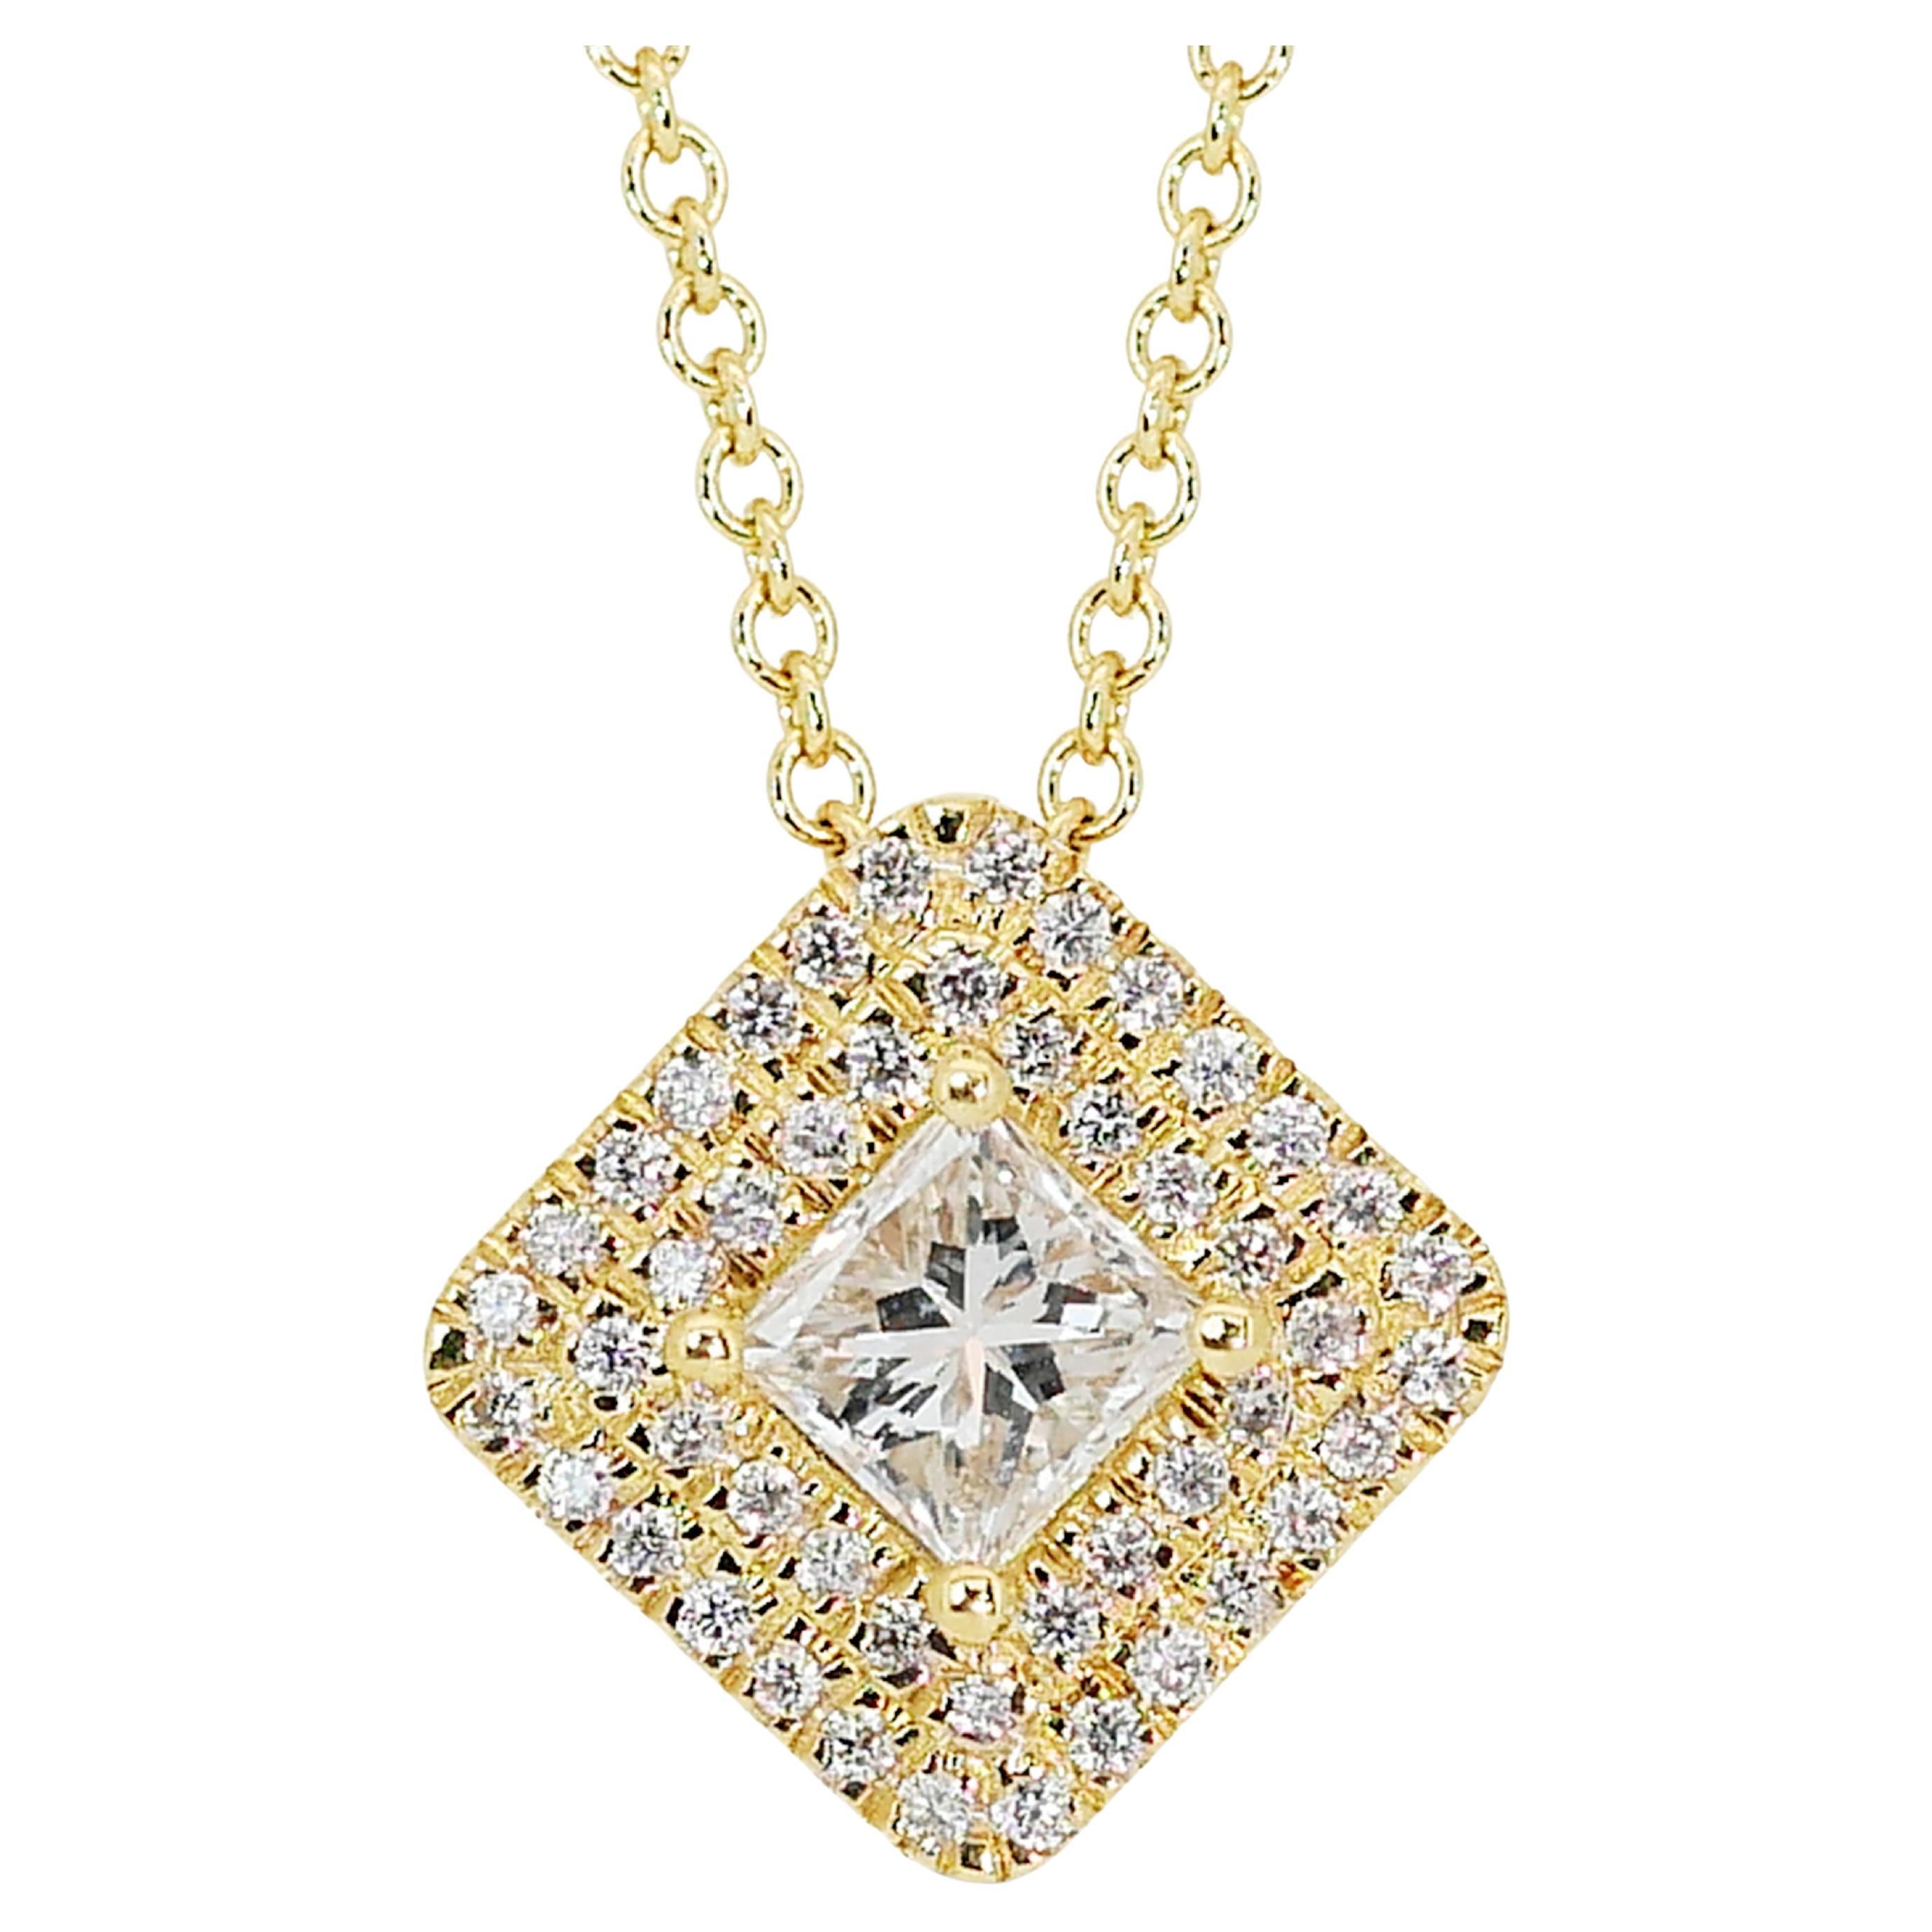 Sophisticated 0.60ct Diamonds Double Halo Necklace in 18k Yellow Gold - IGI Cert